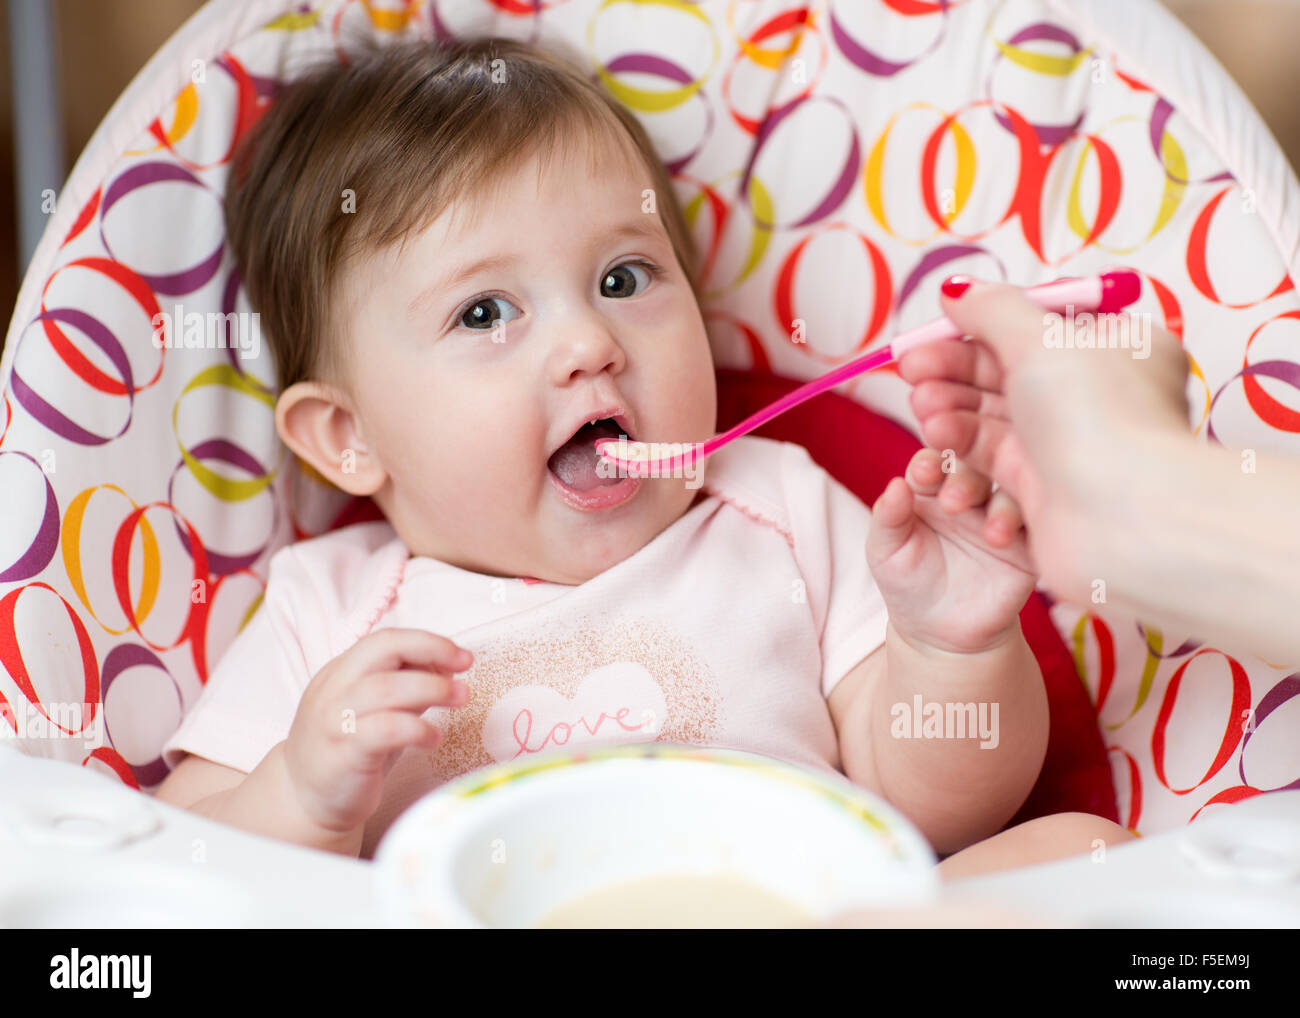 baby kid girl eating food with mother help Stock Photo